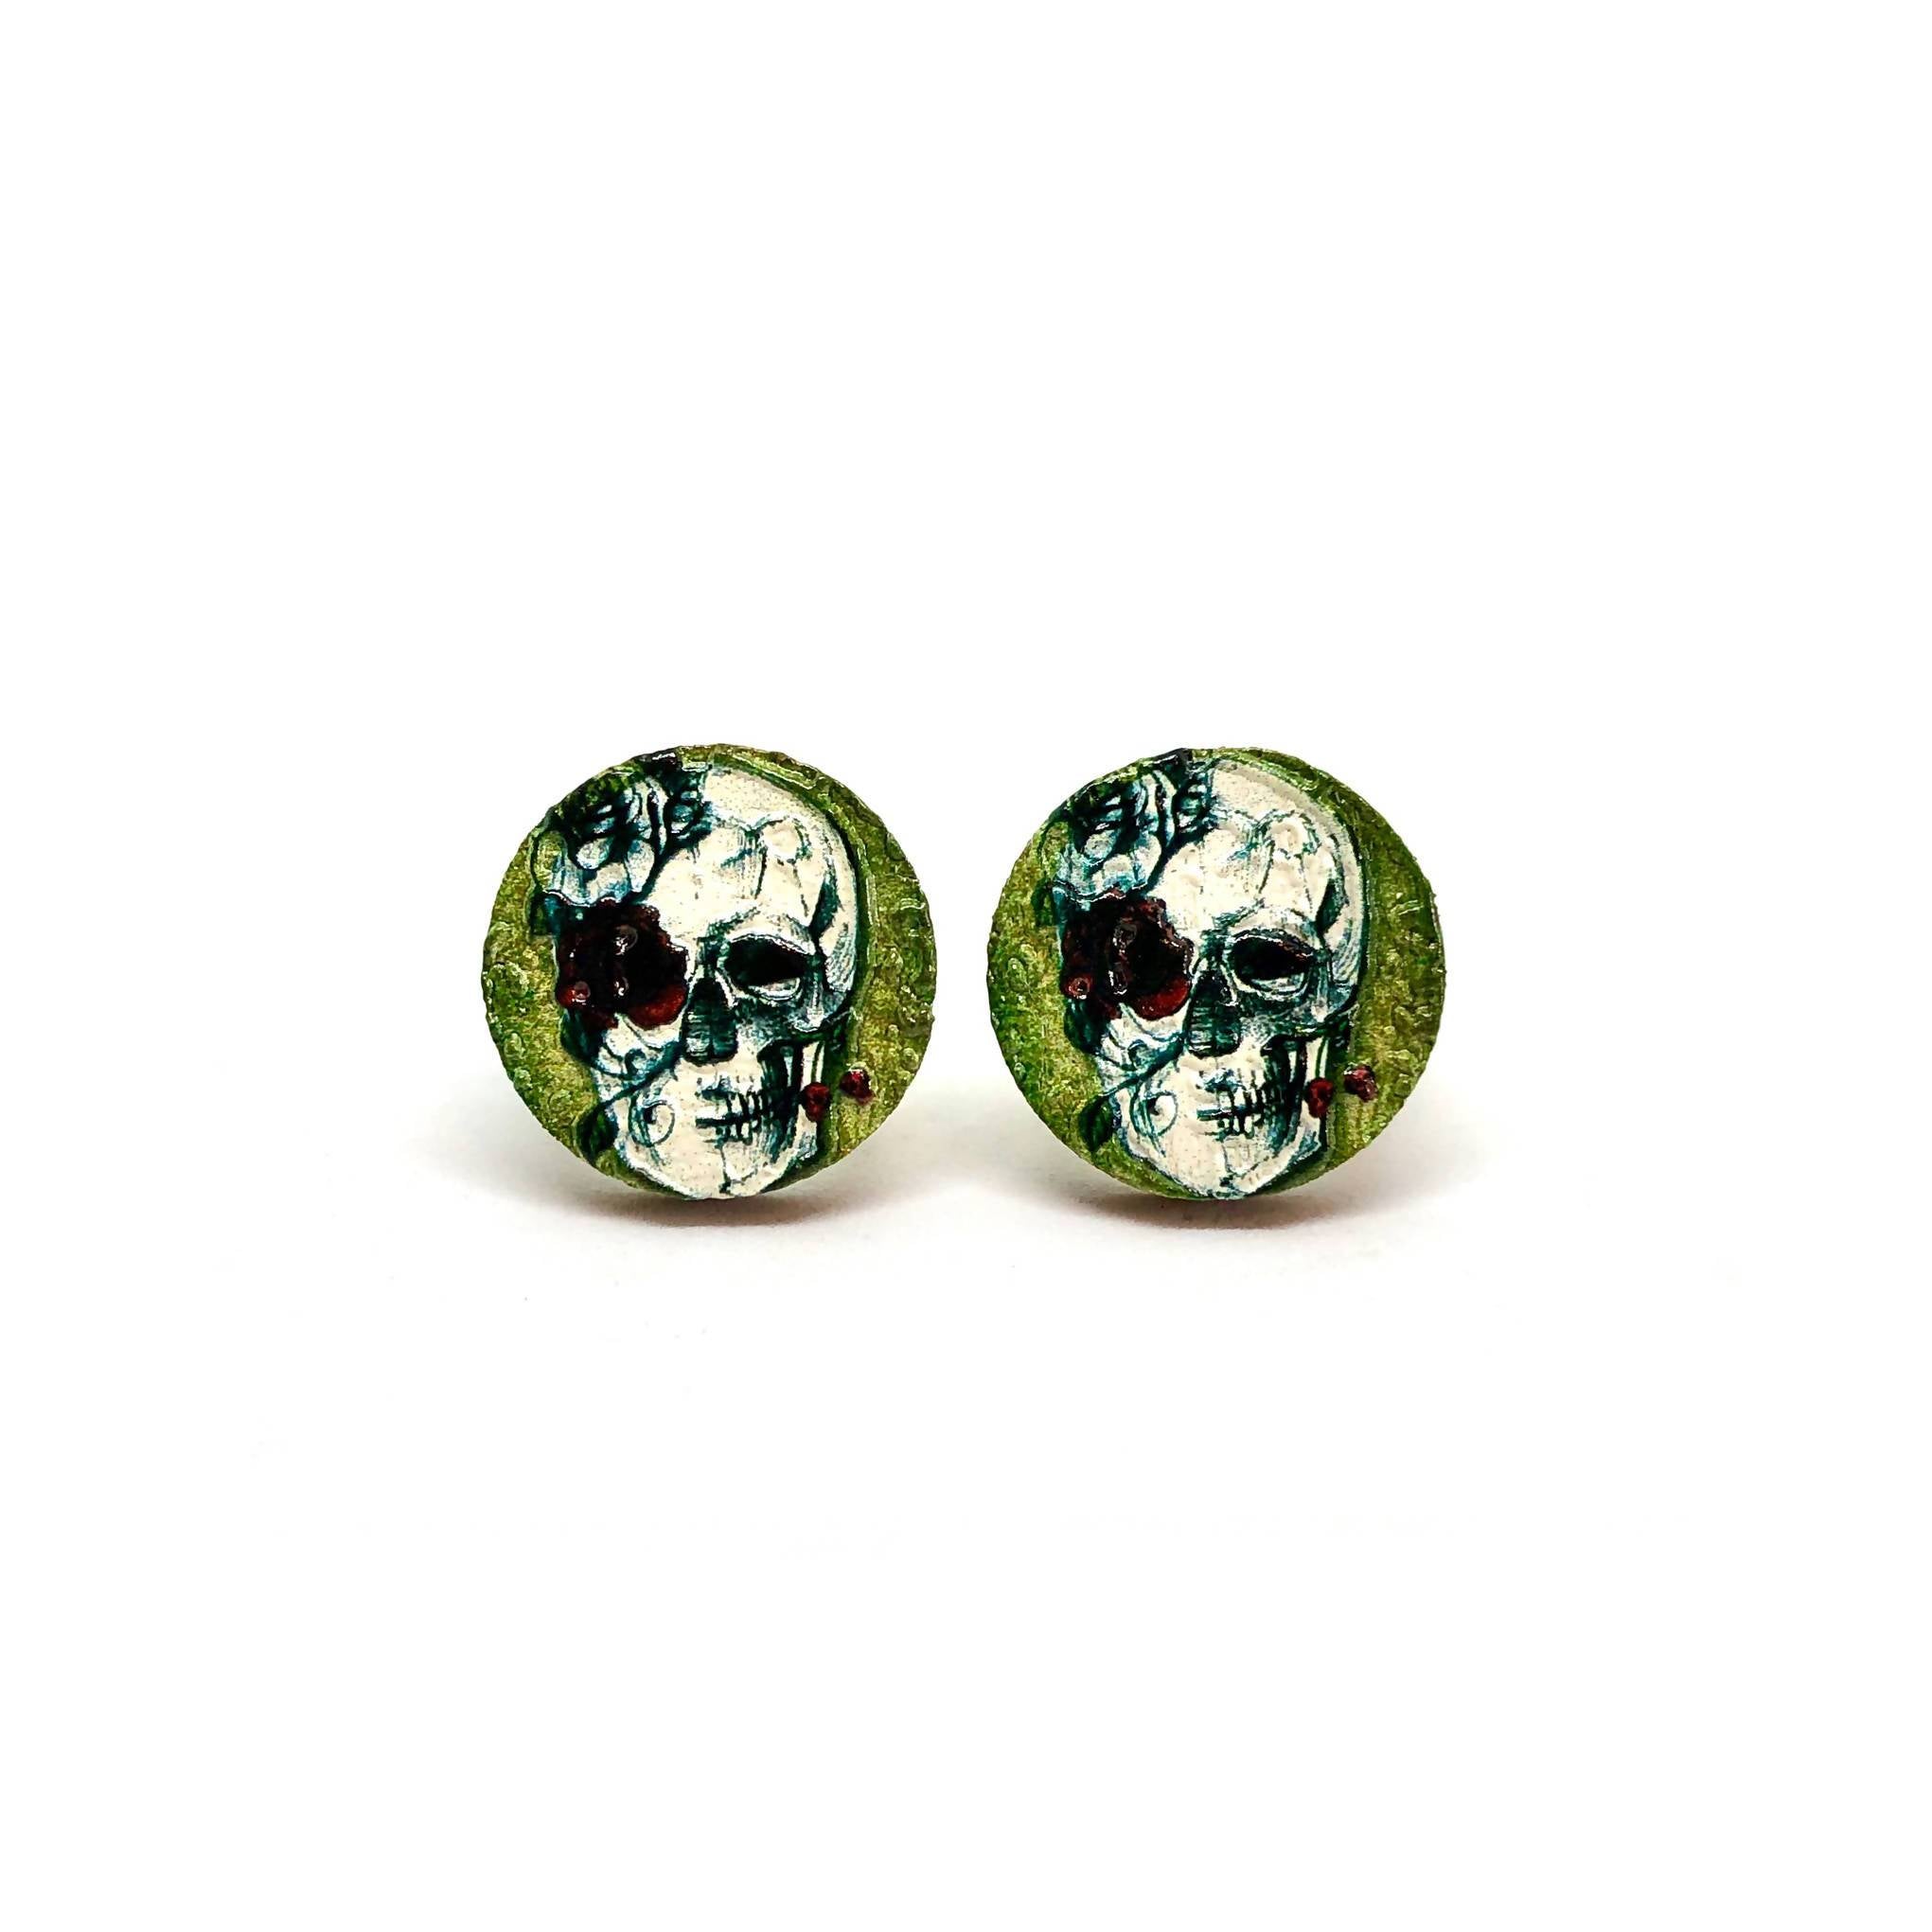 Fury Skull Wooden Earrings - Earring Studs - Paperdaise Accessories - Naiise